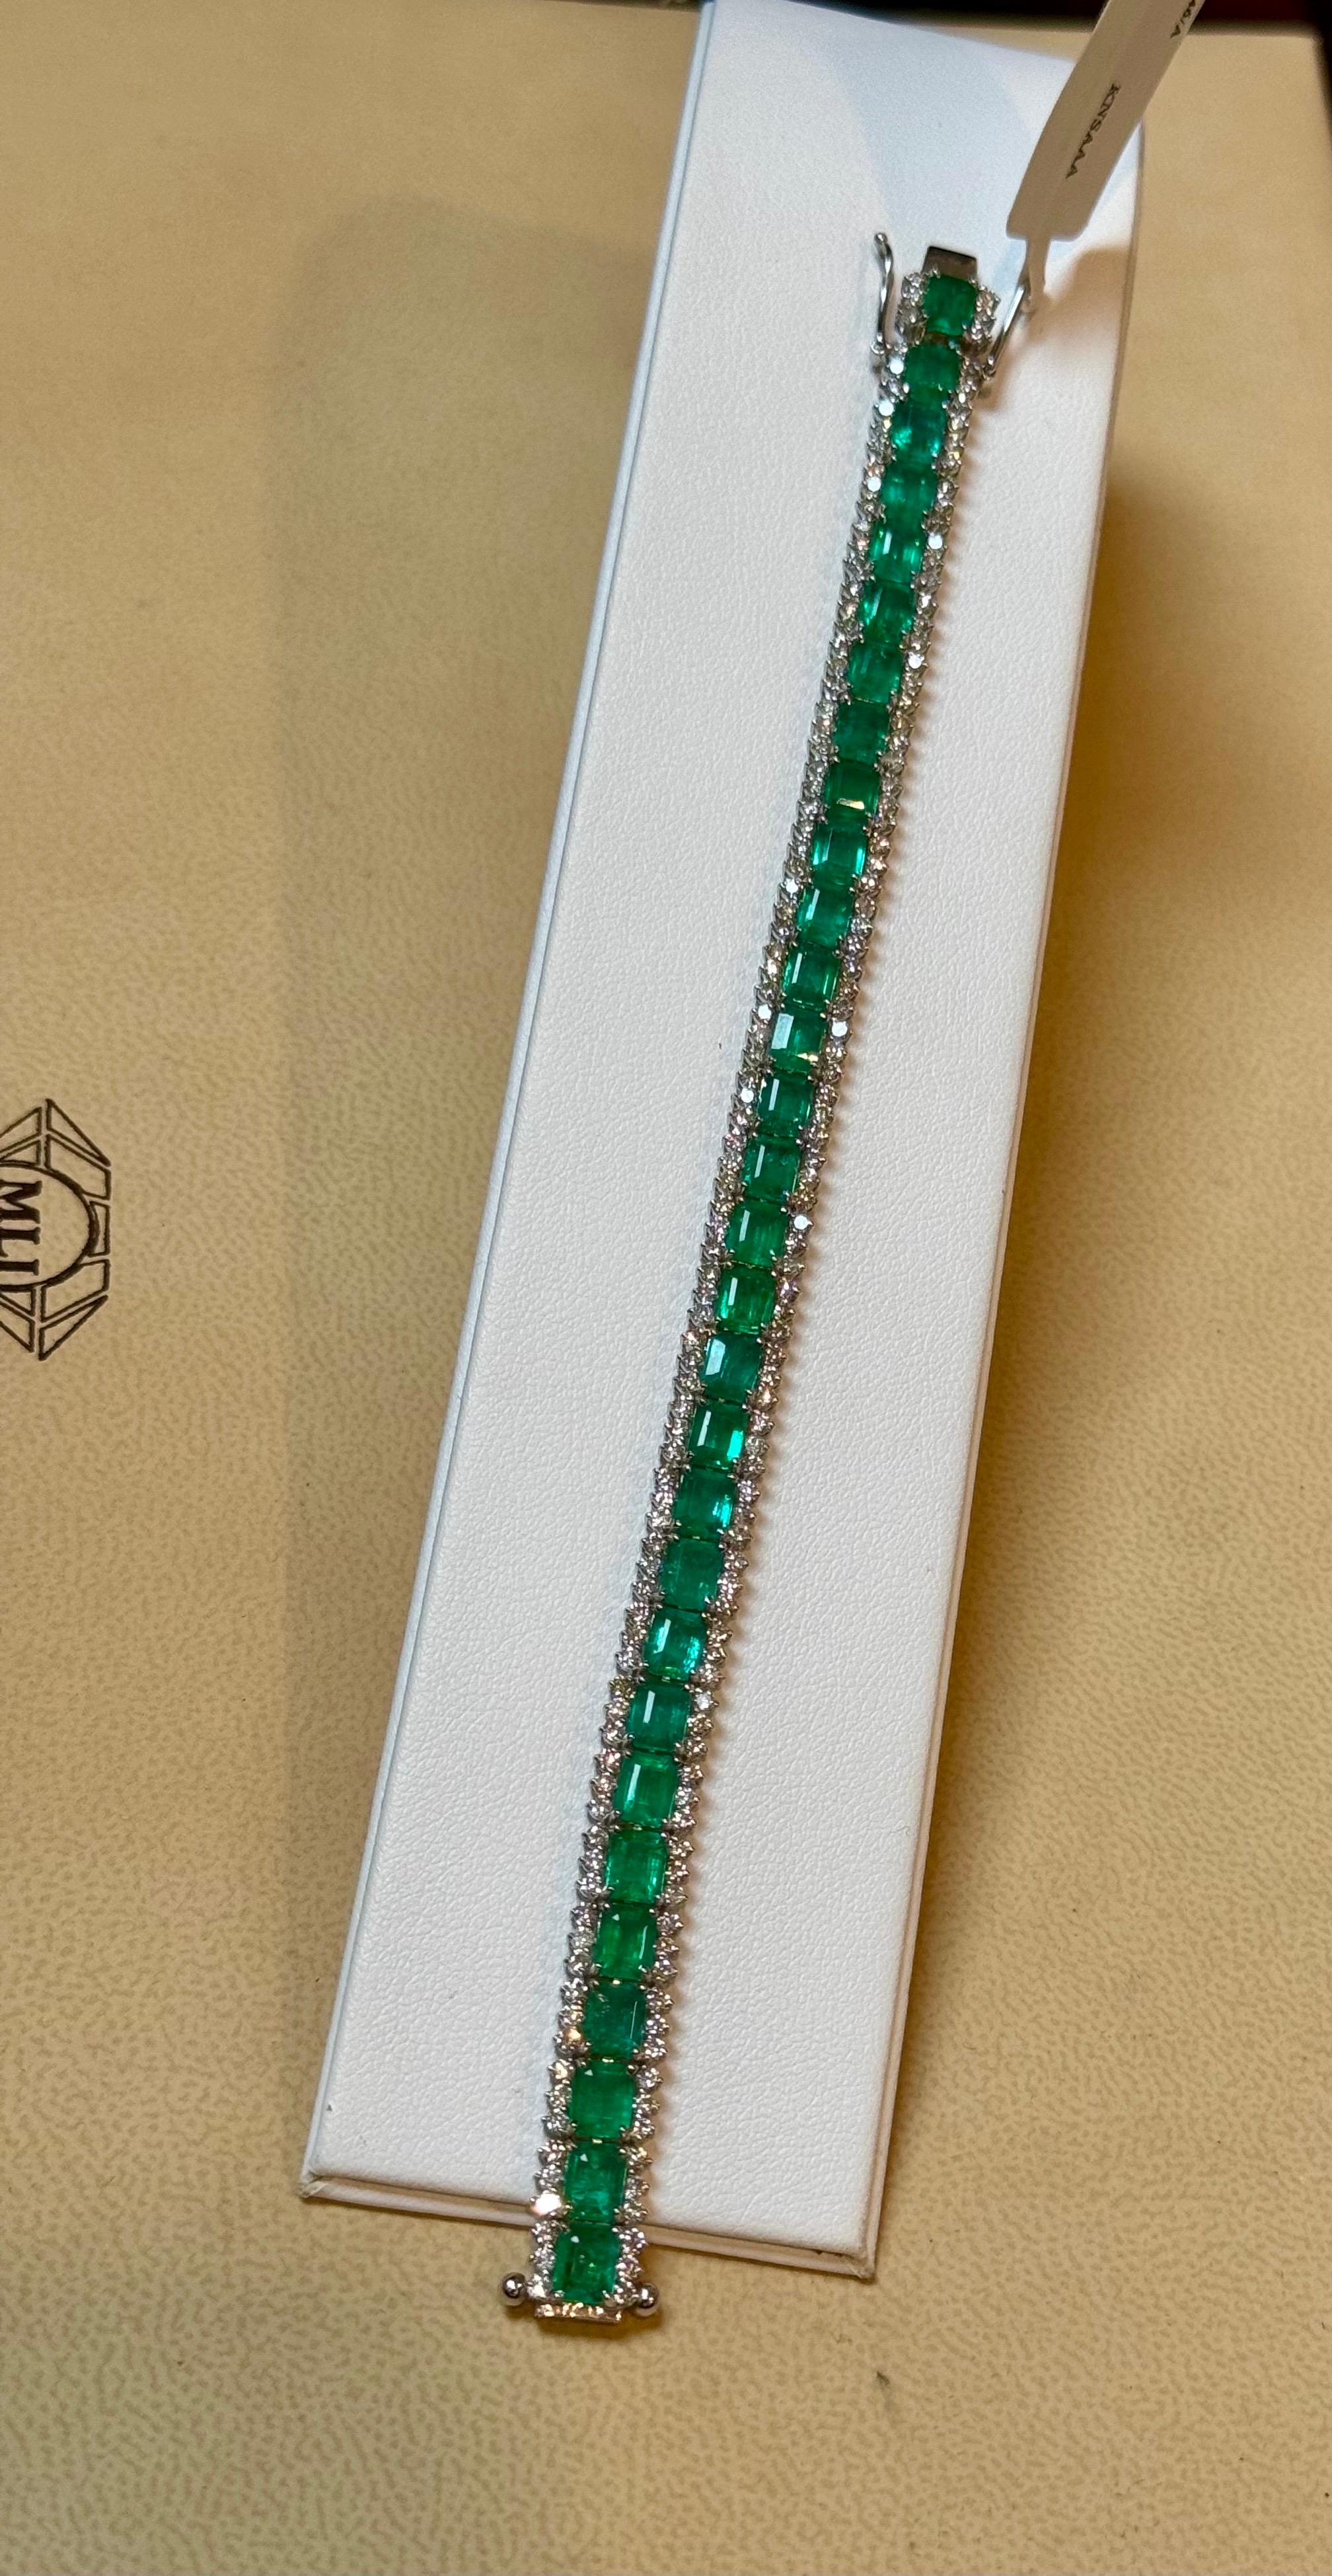 12.46 Ct Natural Zambian Tennis Bracelet with 3.25 Ct Diamonds and 18k Gold 4